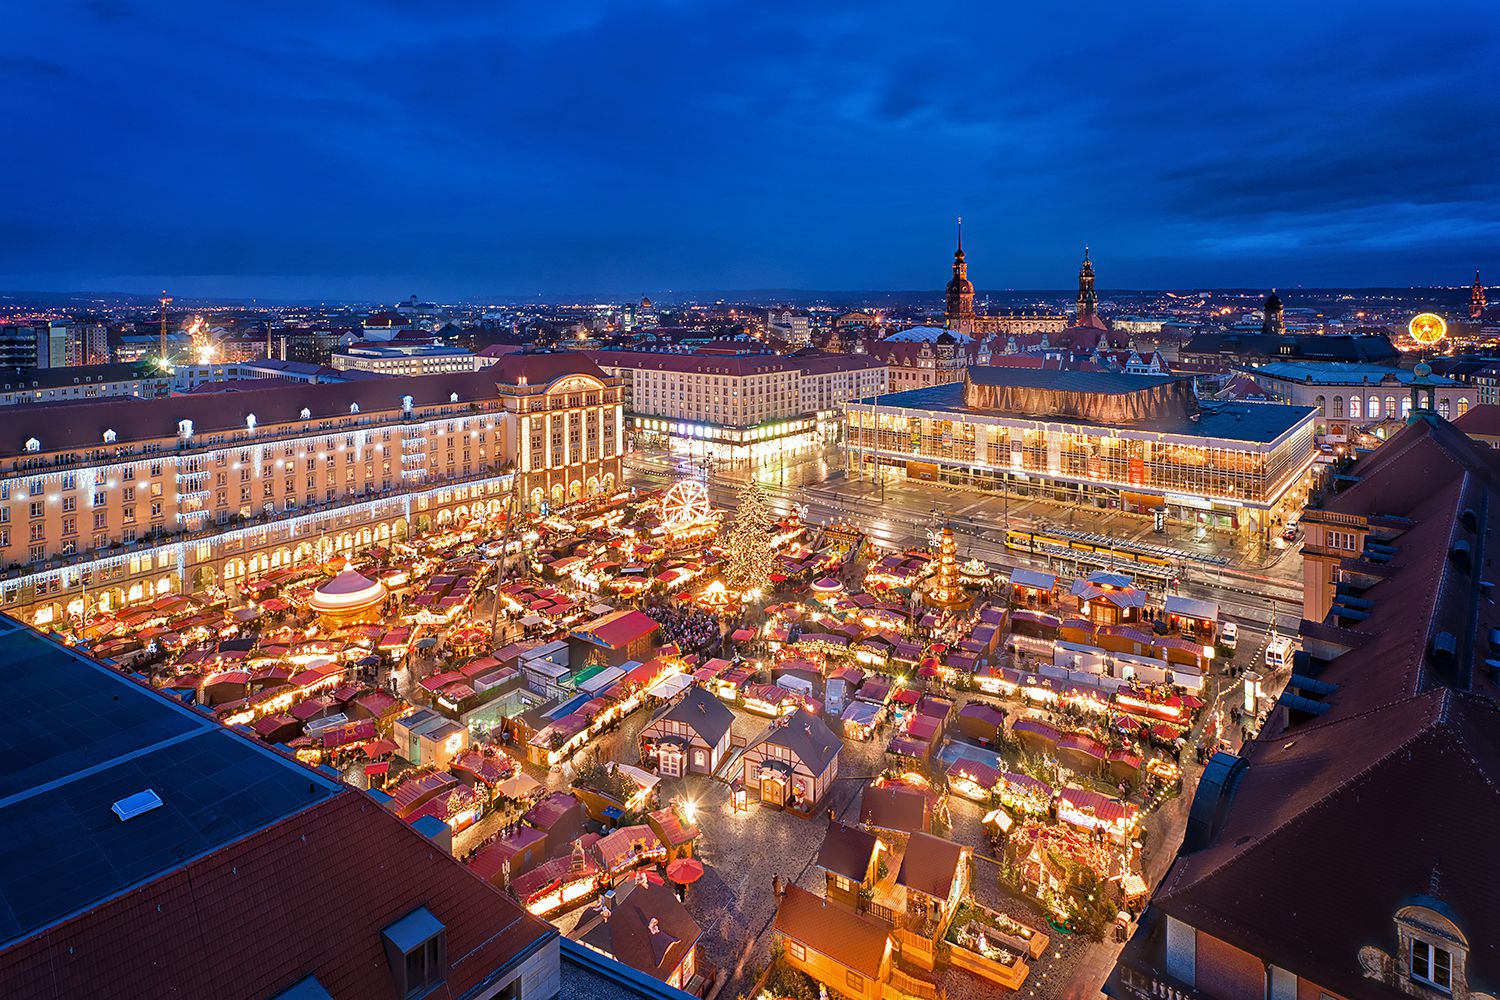 The Best Christmas Markets in Germany